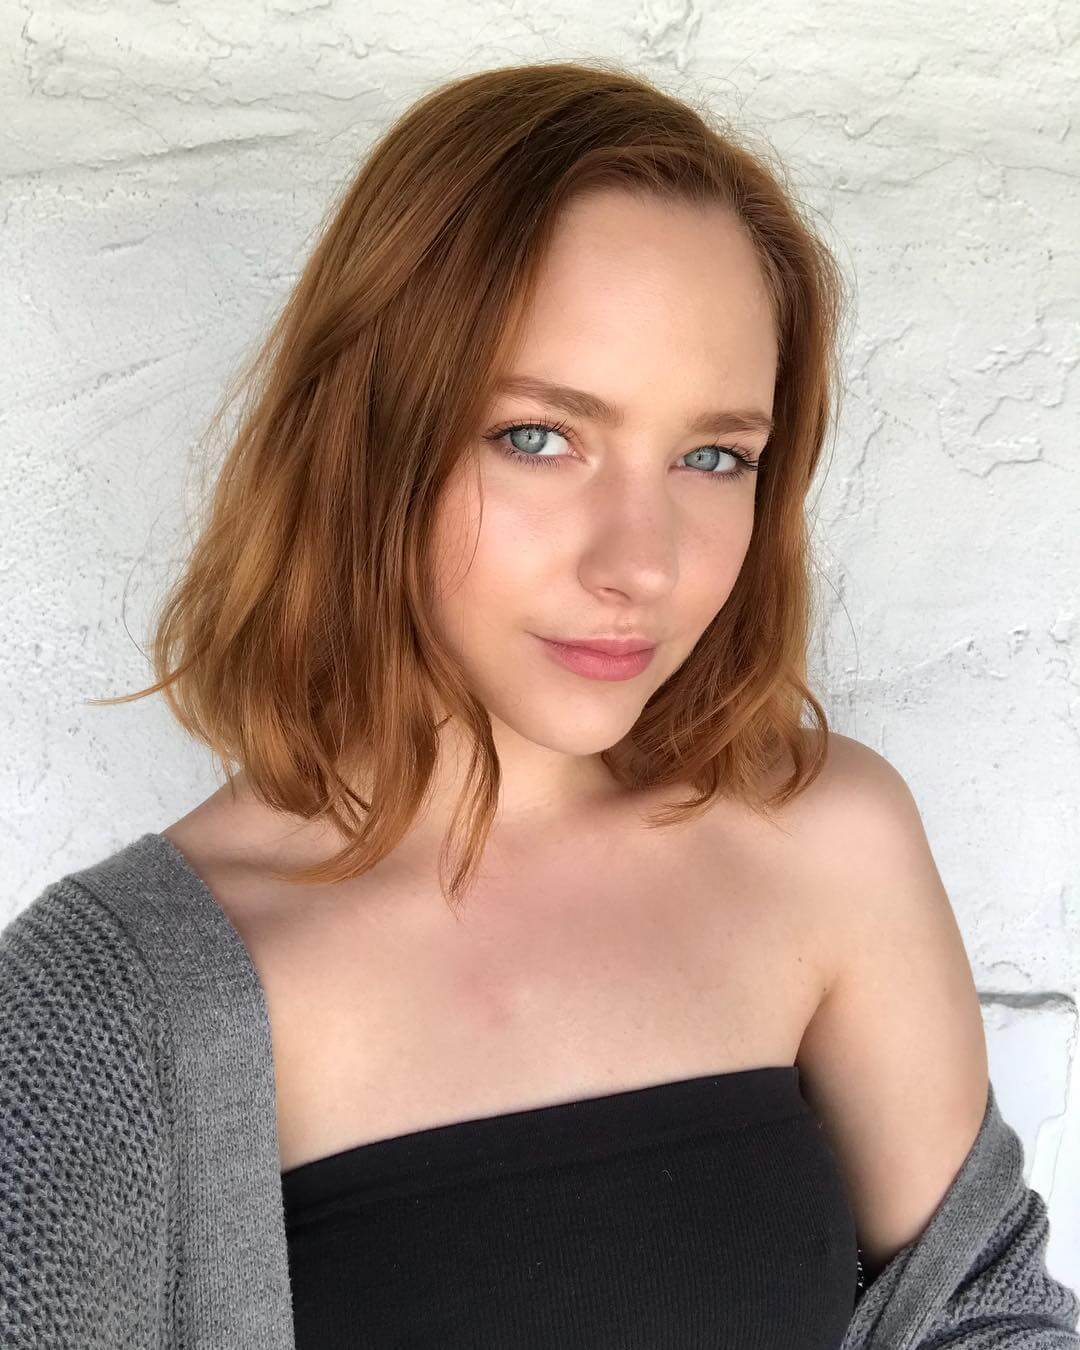 49 Hot Pictures Of Haley Ramm Which Expose Her Sexy Hour-glass Figure | Best Of Comic Books